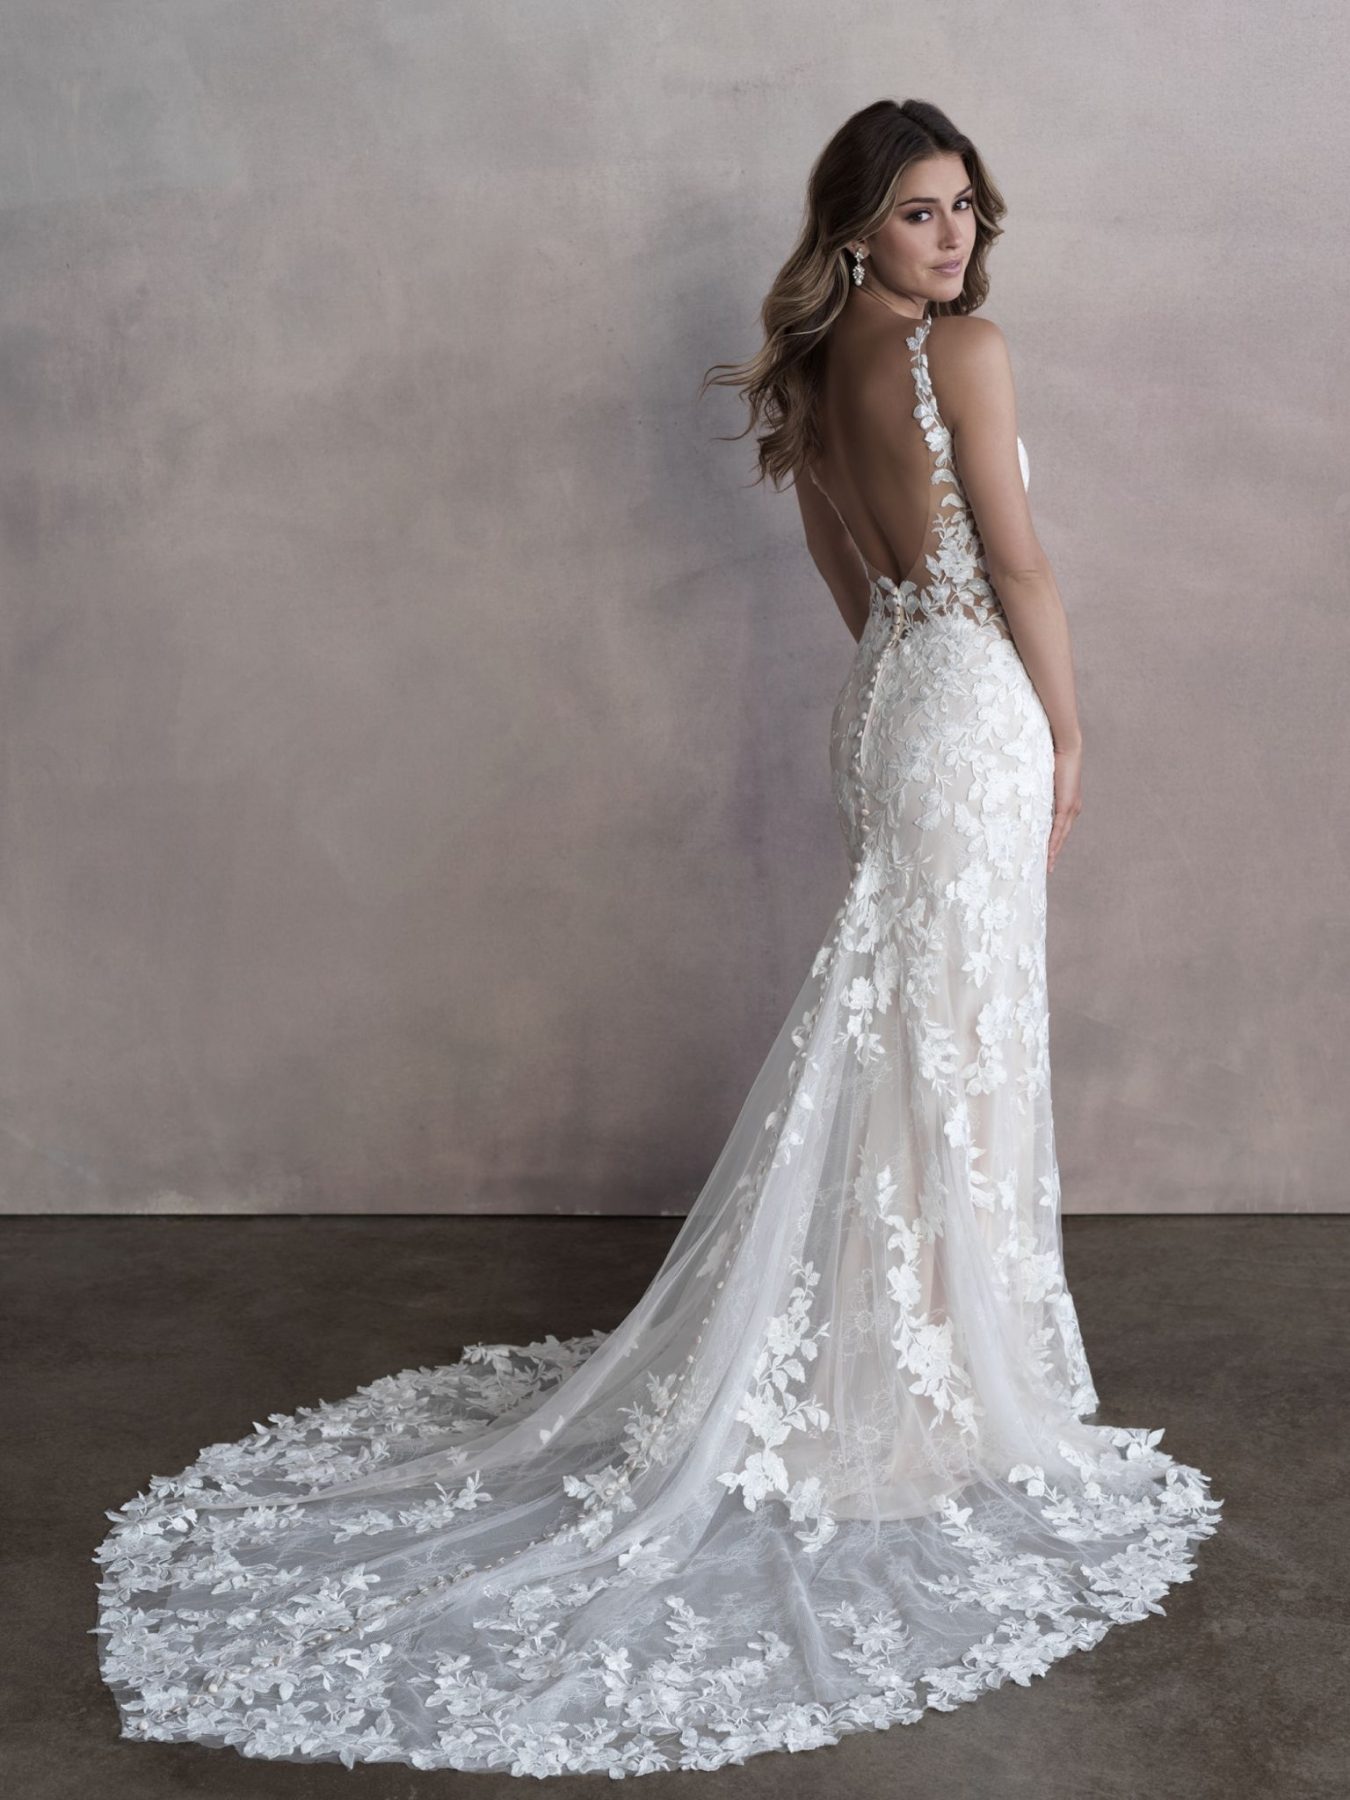 Lace Wedding Dresses Of The Most Beautiful Lace Bridal Gowns My XXX Hot Girl